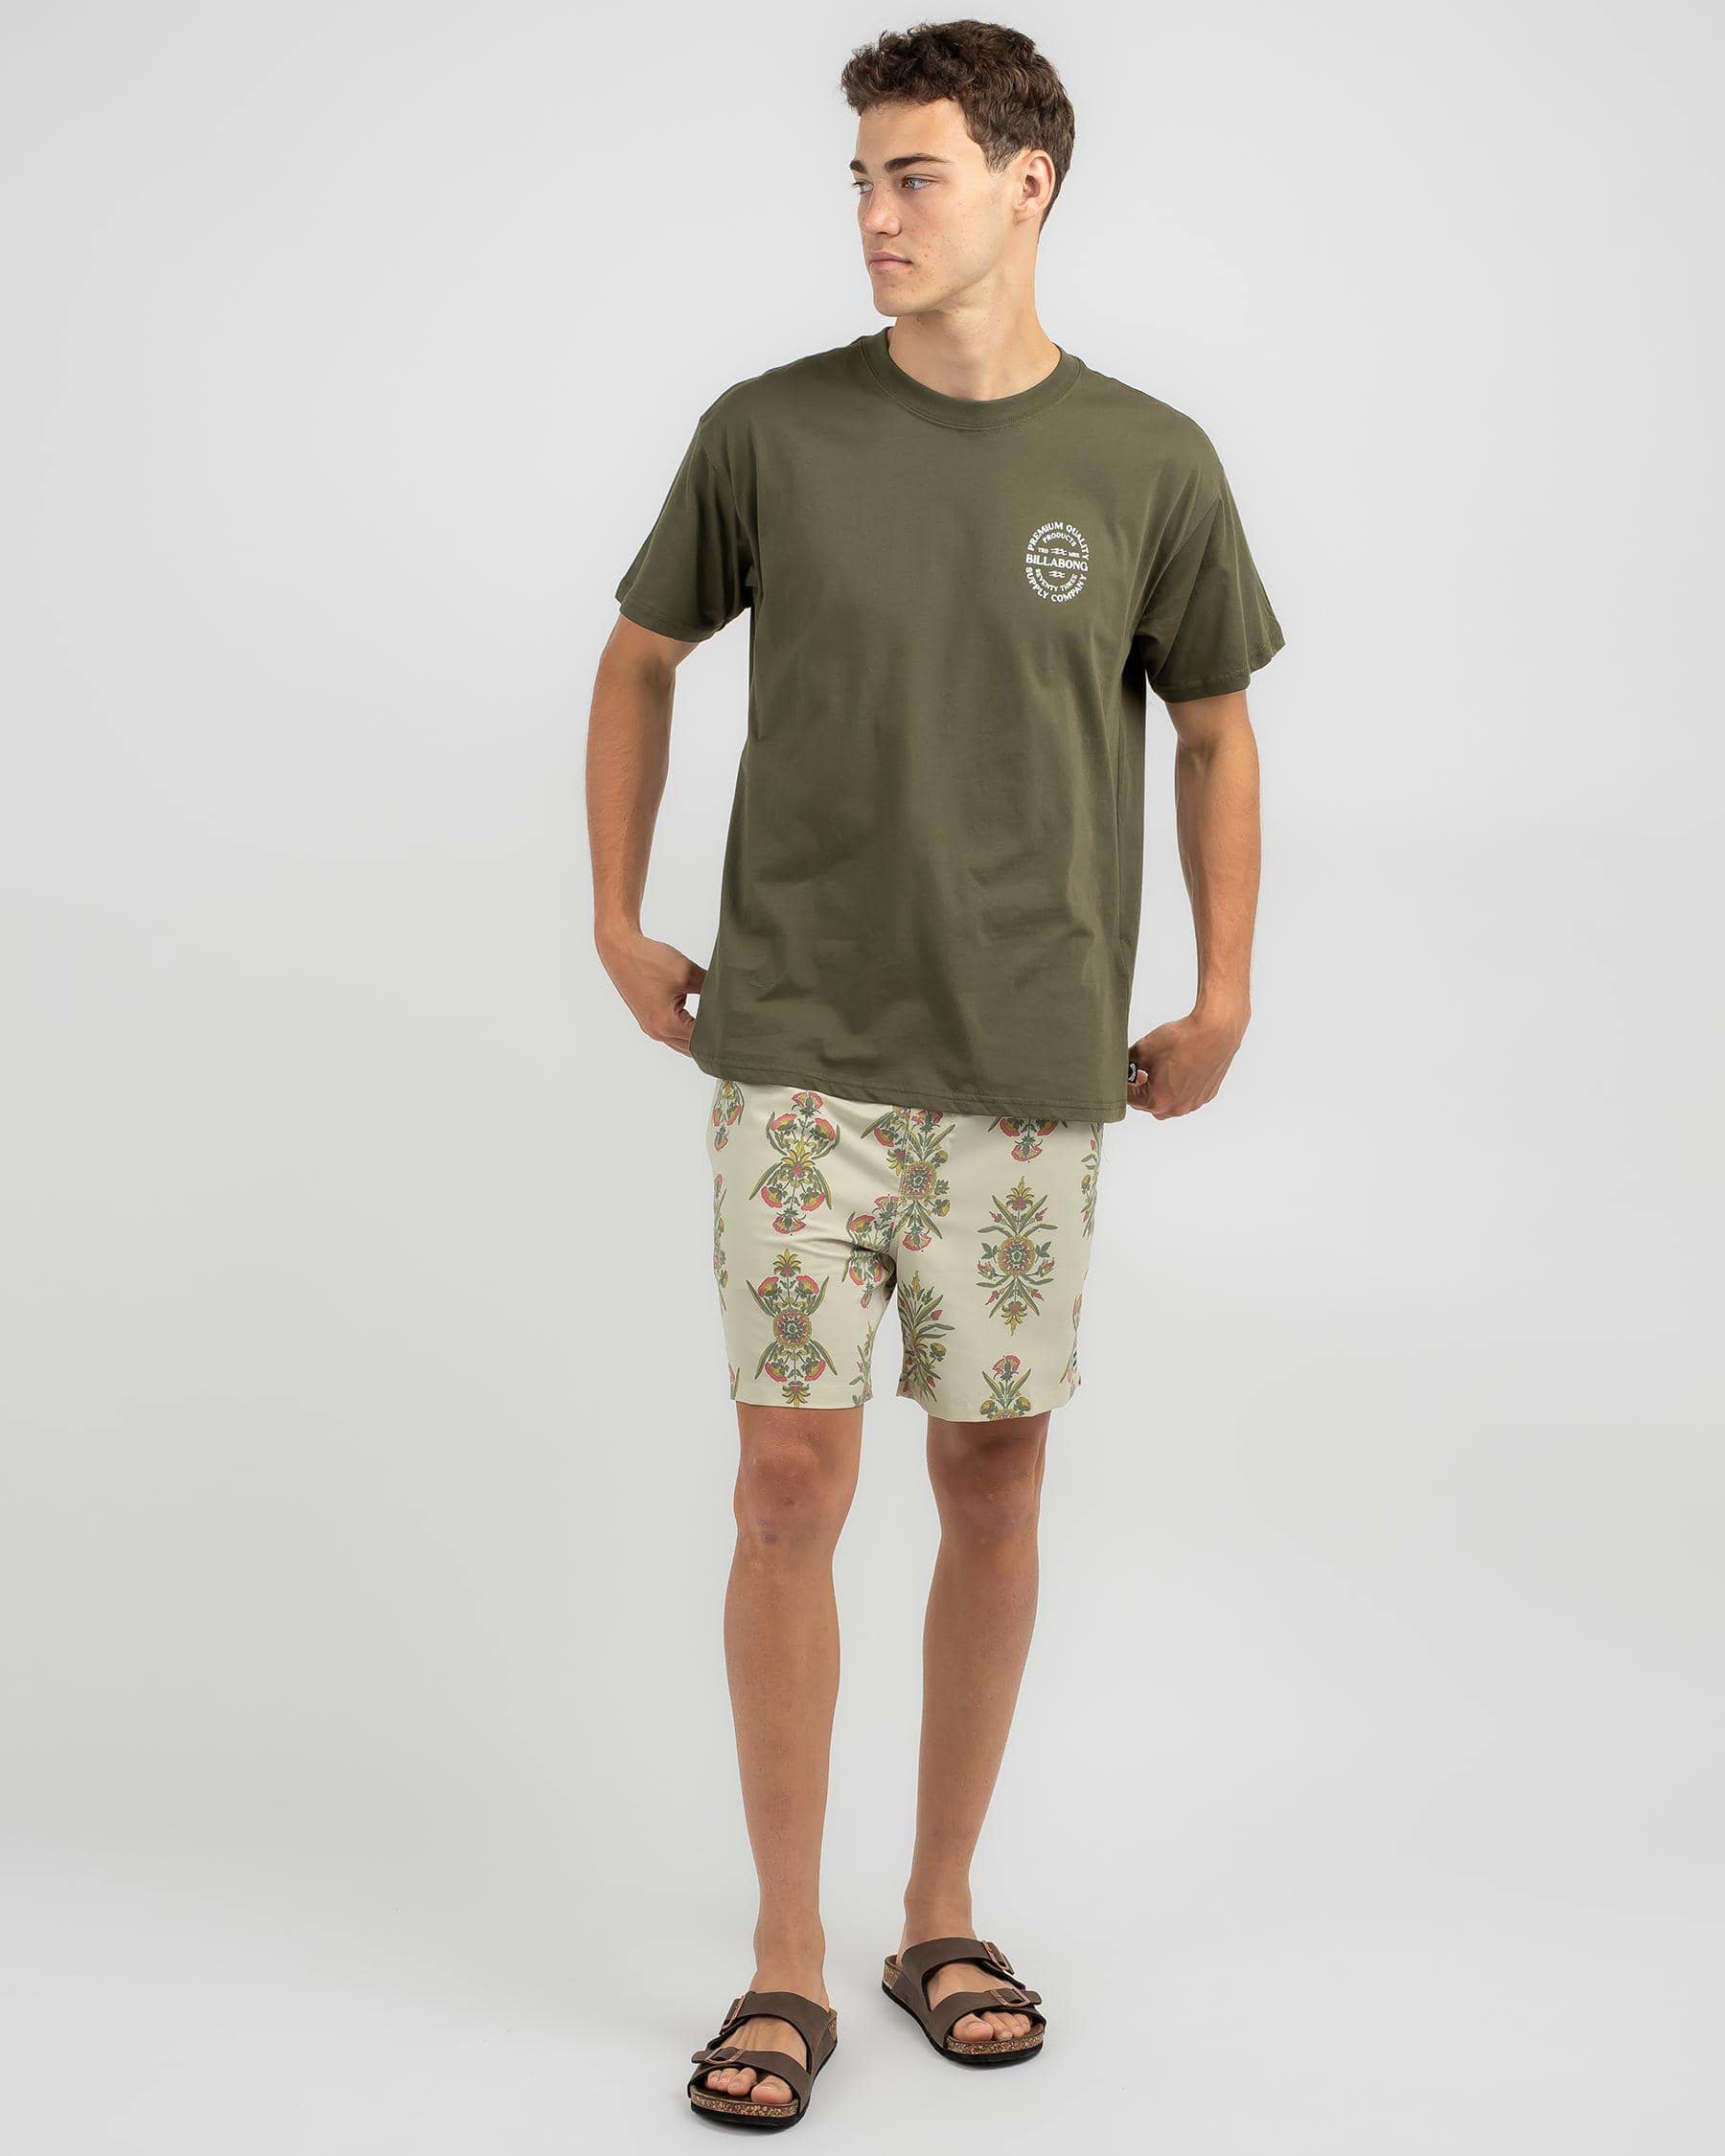 Shop Billabong Supply T-Shirt In Military - Fast Shipping & Easy ...